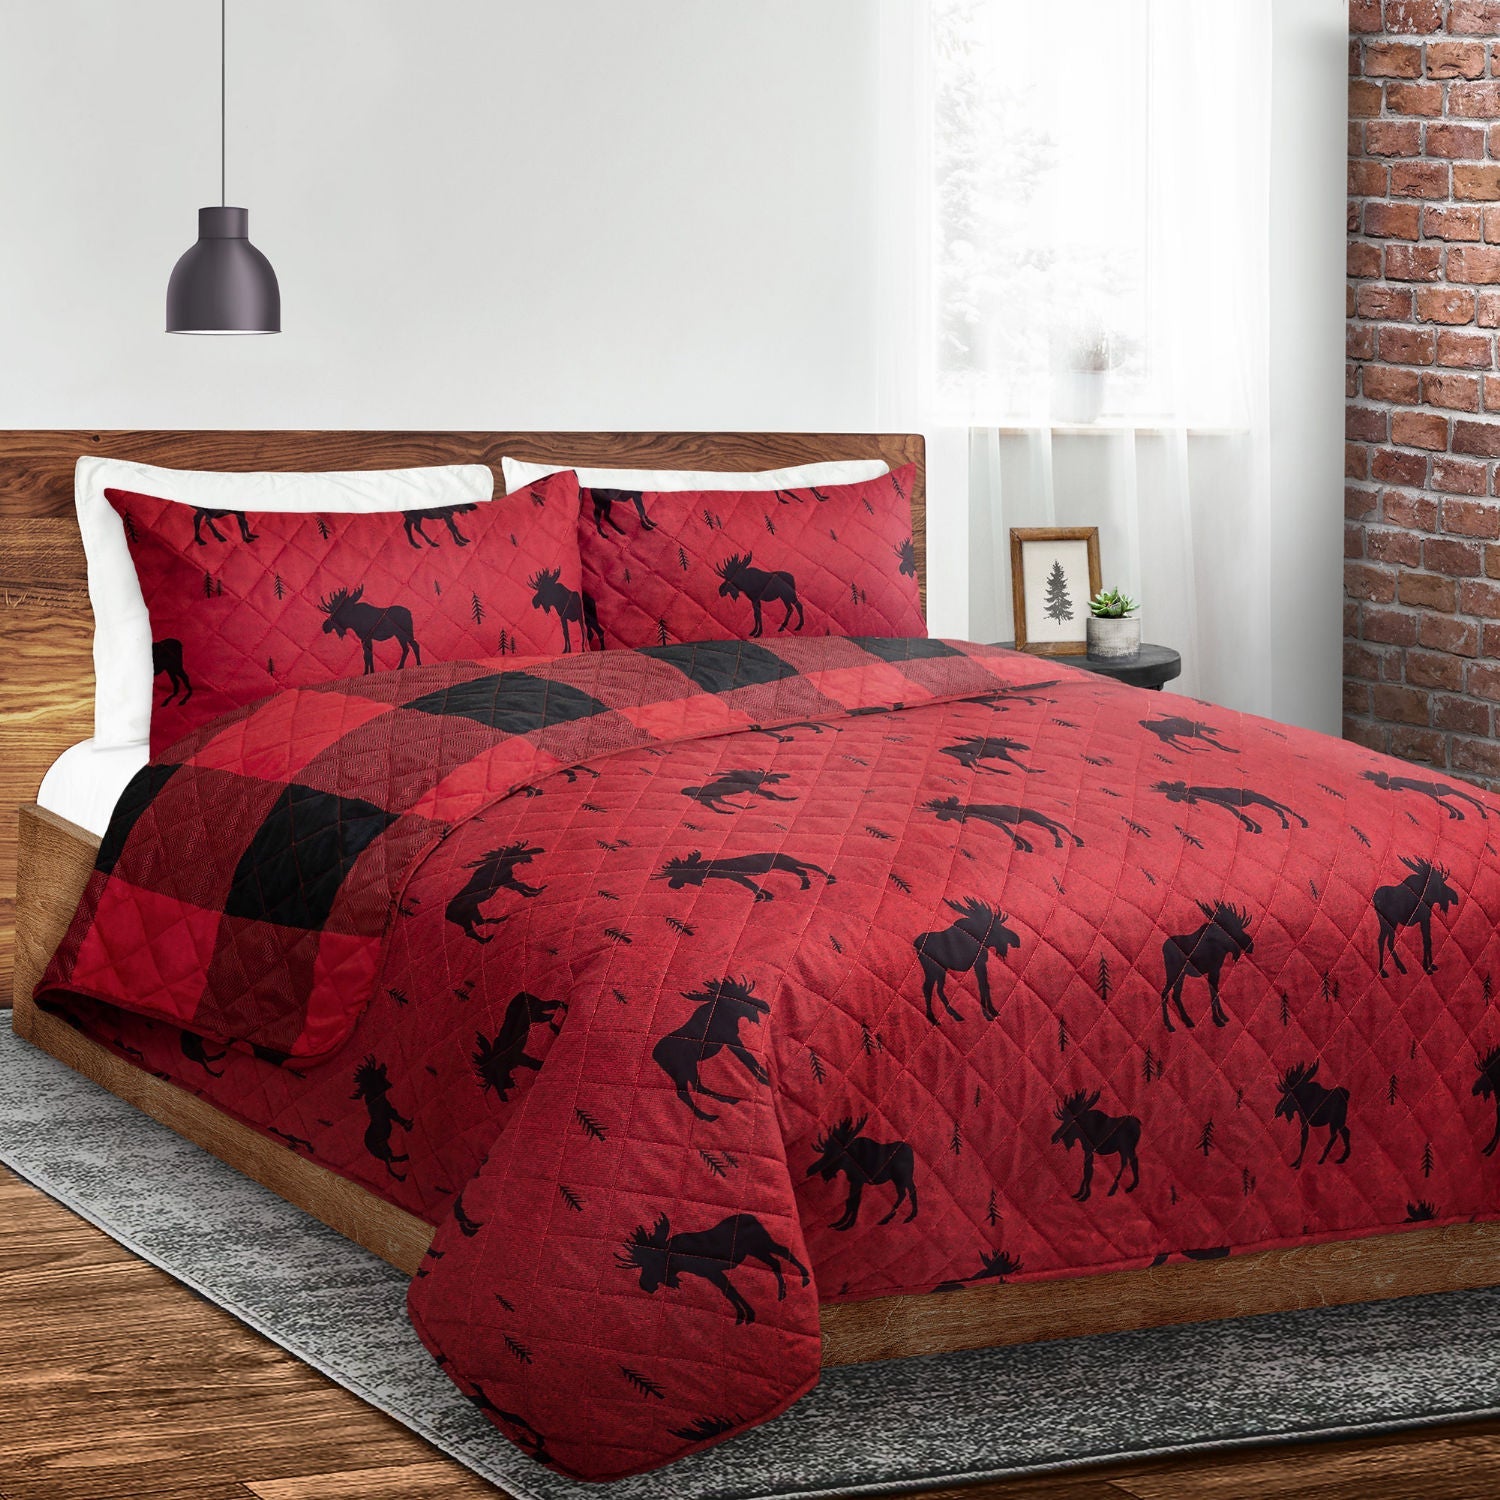 Reversible Printed Quilt Bedding Set 3 Piece Double/Queen 90X90 Red Moose Rustic Cabin